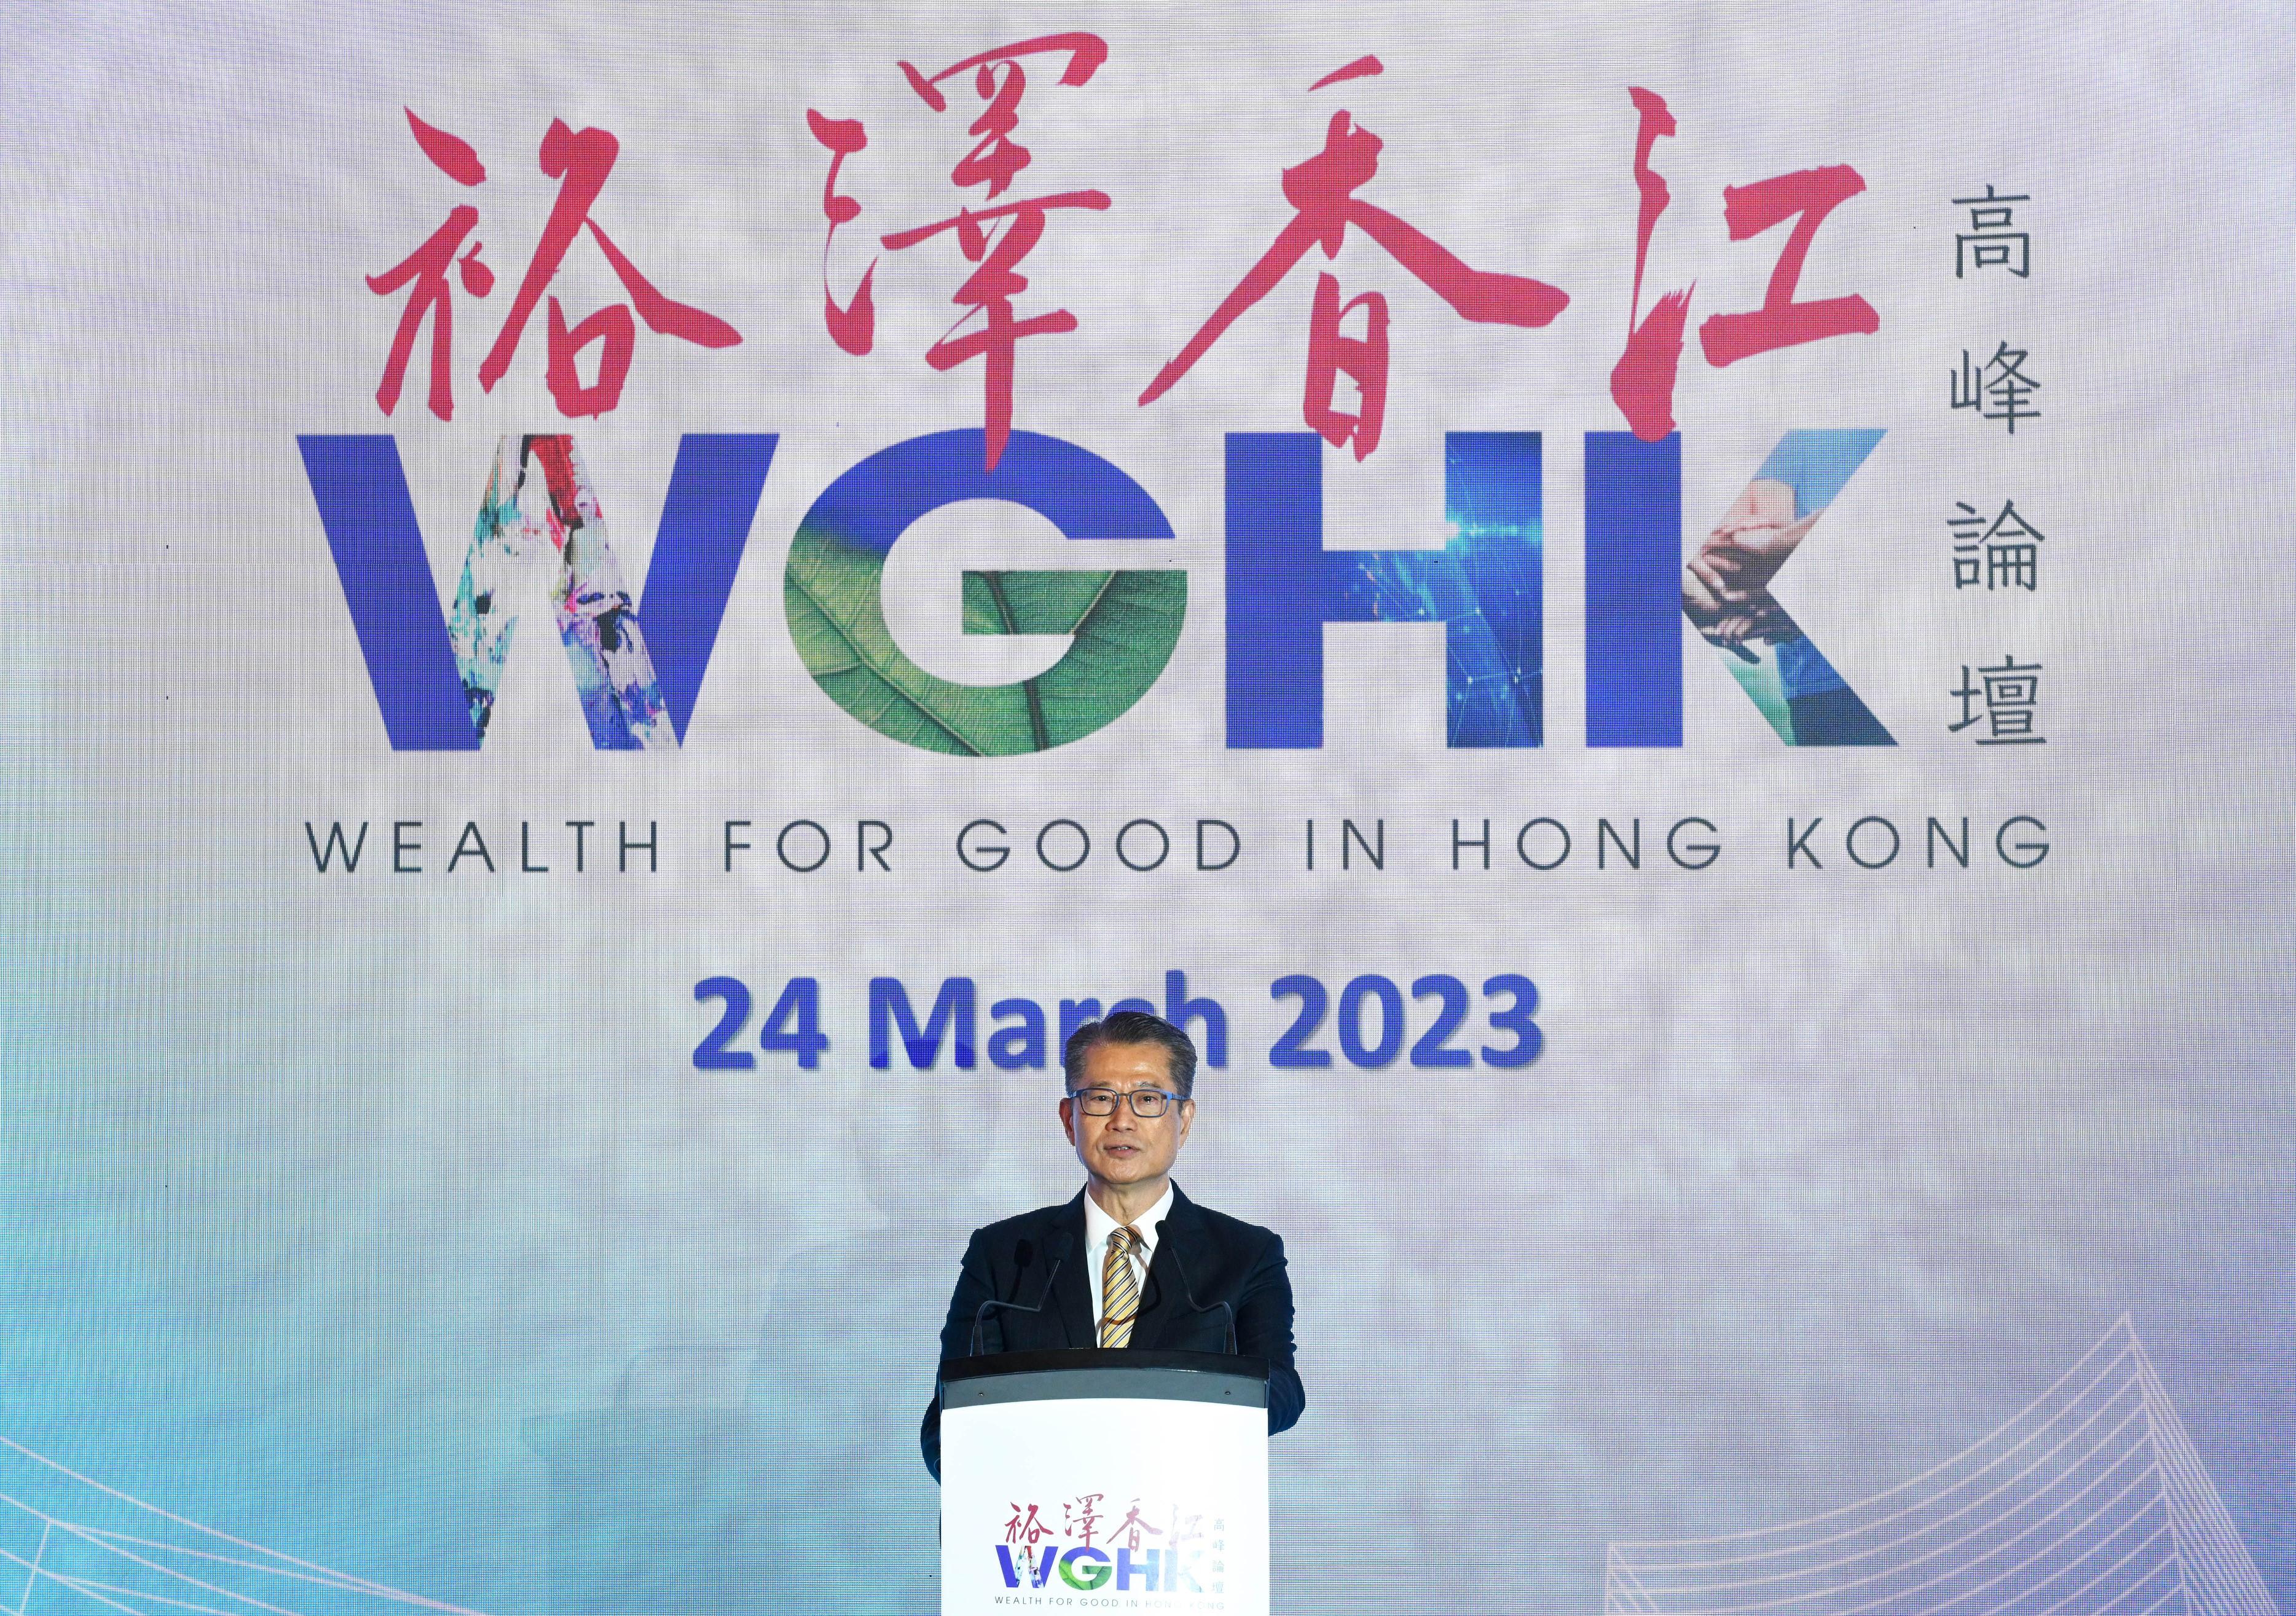 The Financial Secretary, Mr Paul Chan, delivered opening remarks to over 100 decision makers from global family offices during a luncheon at the inaugural Wealth for Good in Hong Kong Summit today (March 24), introducing Hong Kong's strengths and opportunities in developing itself as a leading hub for global family offices.
